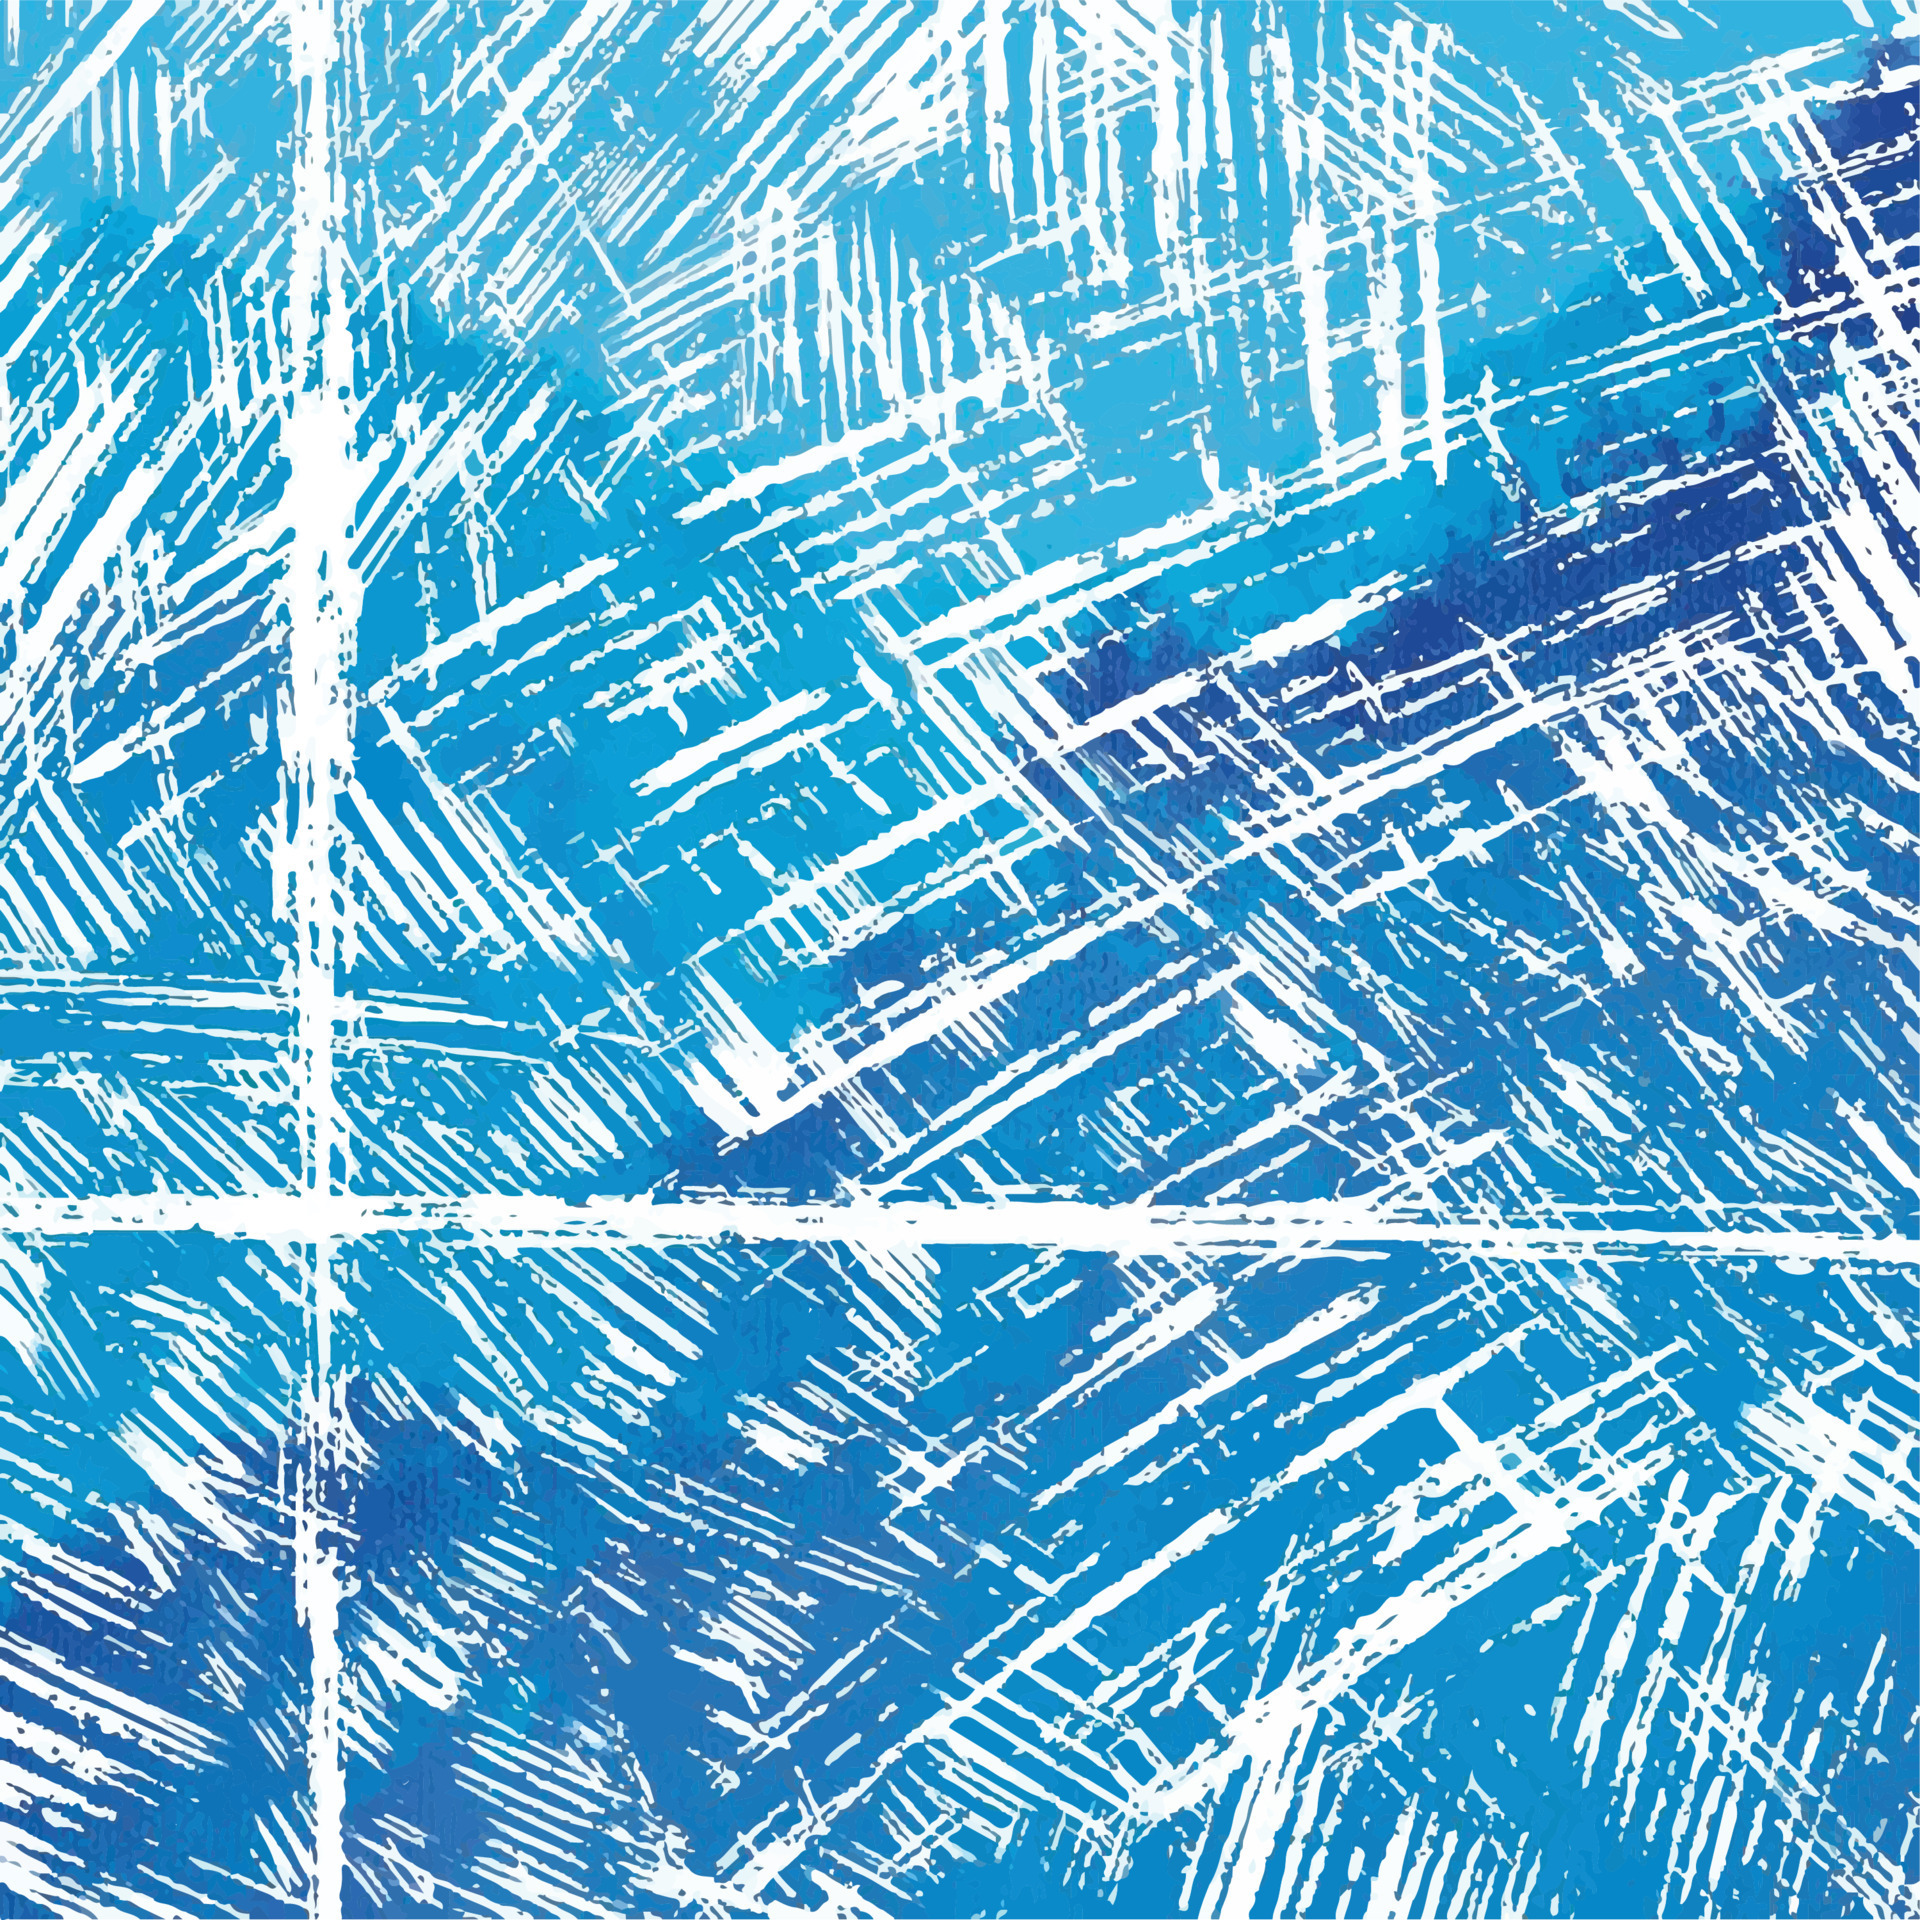 https://static.vecteezy.com/system/resources/previews/017/274/641/original/grunge-scratch-brush-stroke-with-blue-colored-background-isolated-on-square-template-decorative-grungy-wallpaper-for-social-media-post-paper-poster-print-scarf-print-and-other-purposes-free-vector.jpg